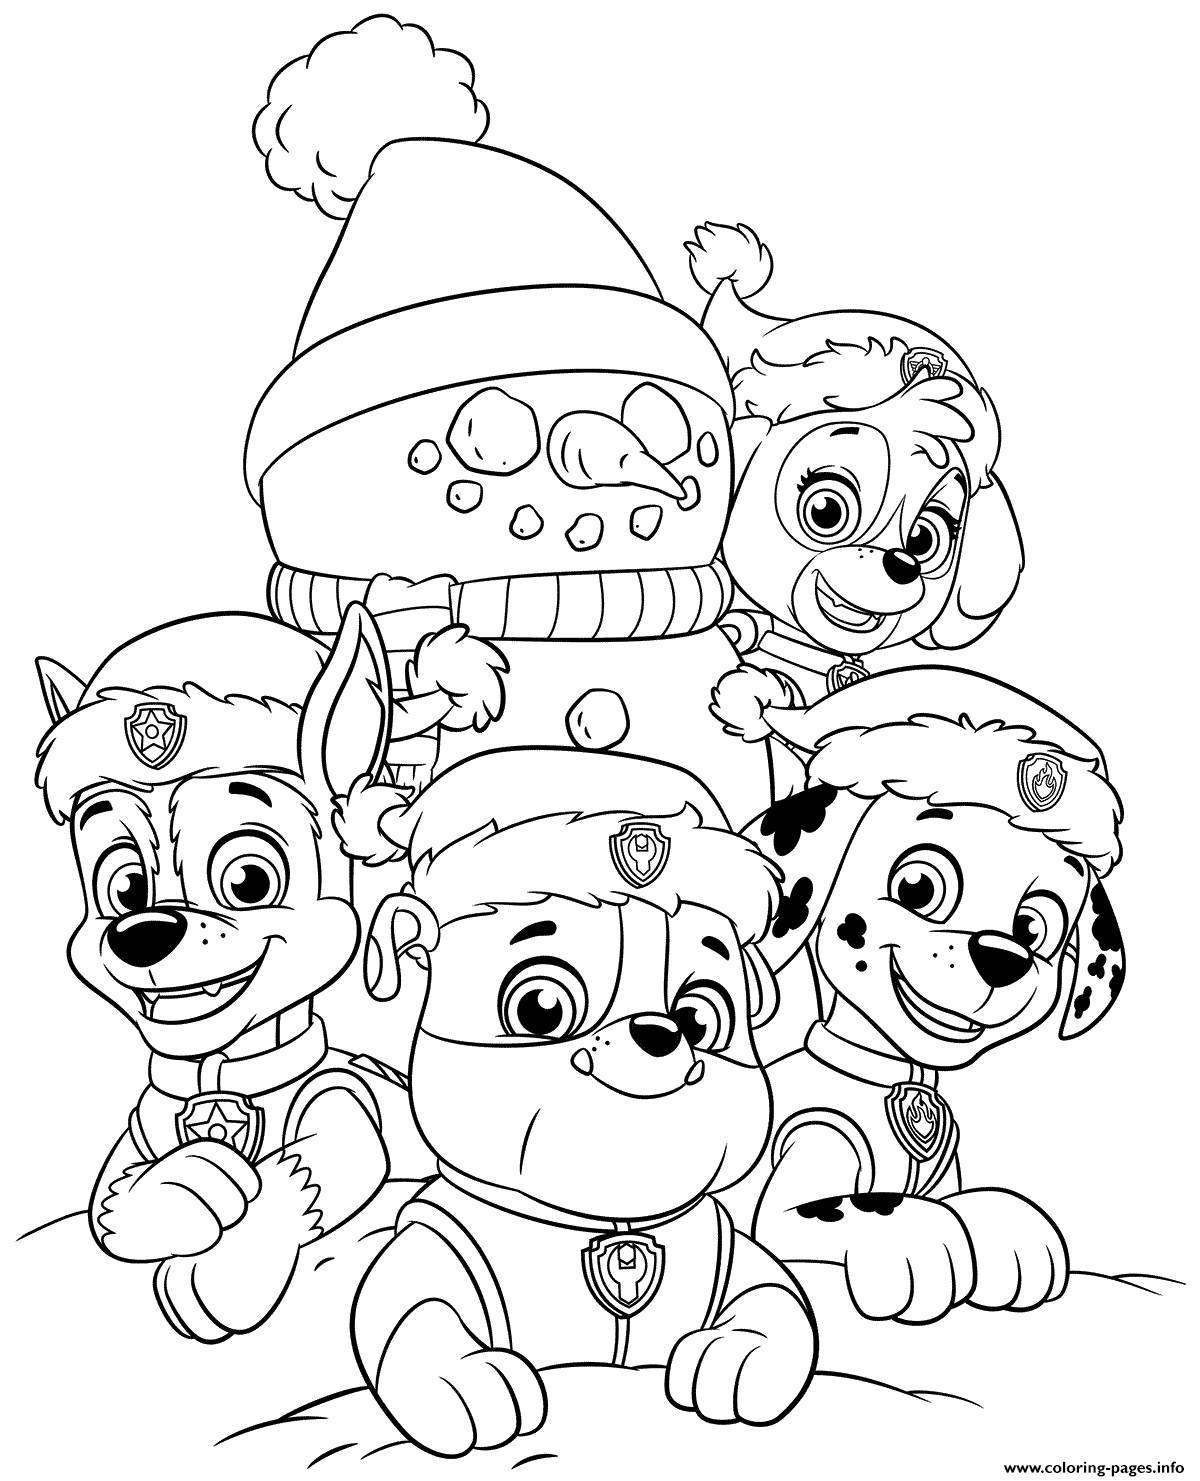 Intriguing paw patrol coloring book new